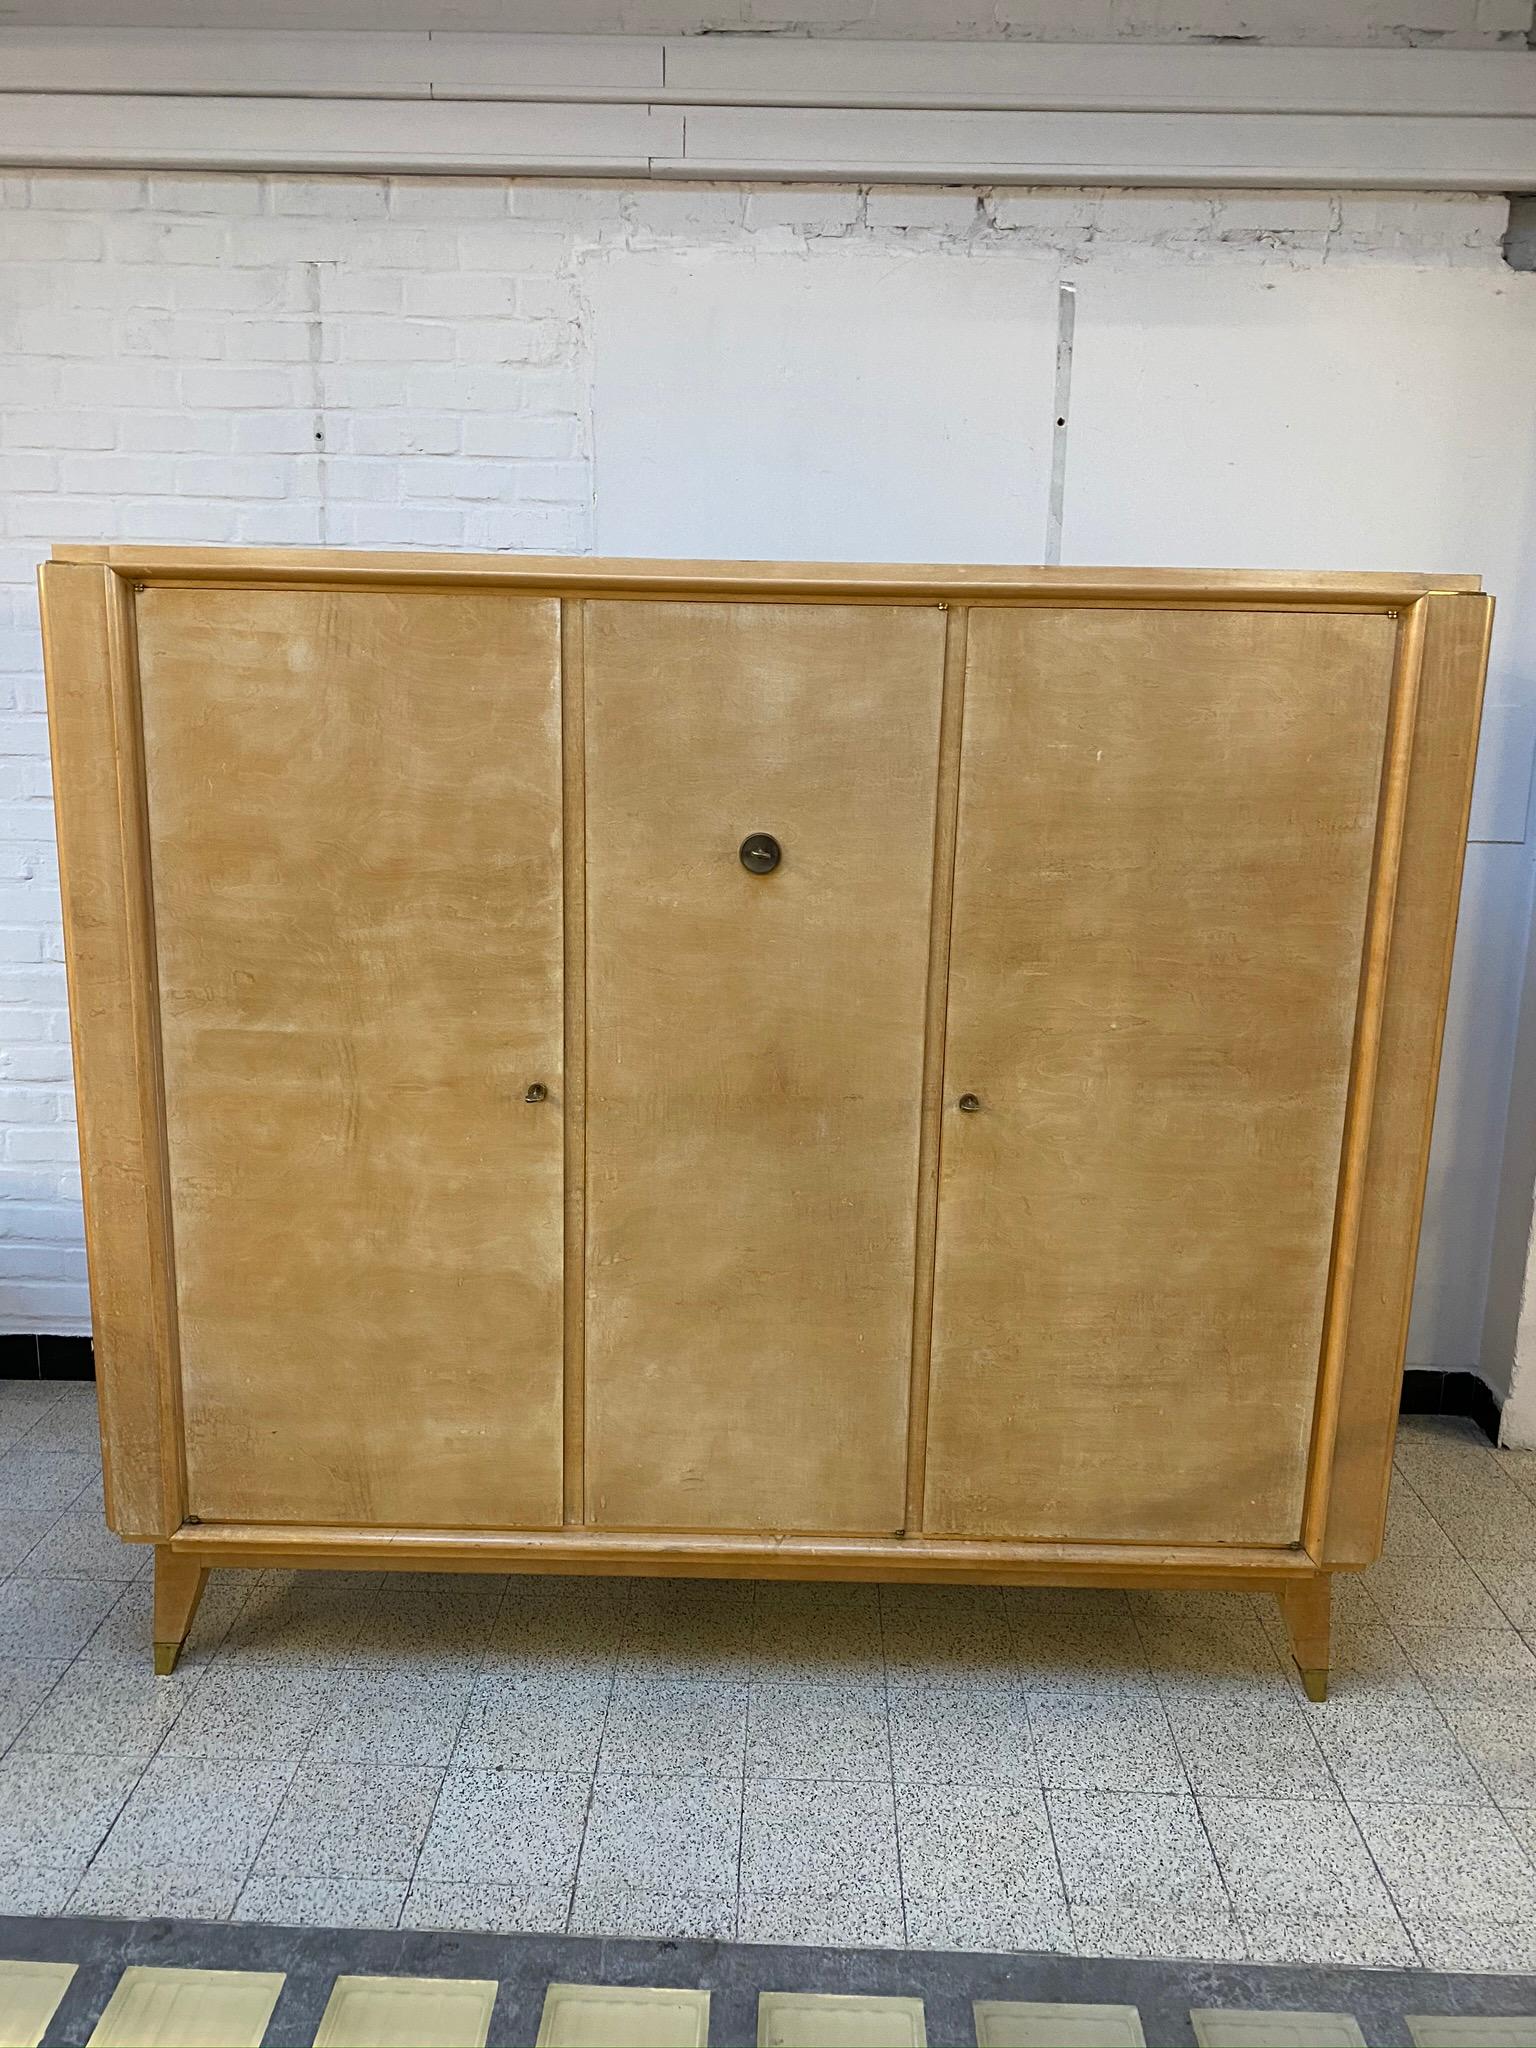 André Beaudoin, Art Deco cabinet in sycamore and bronze, circa 1940-1950.
Good proportion,
A.B monogrammed keys
Complete interior
Patina to review.